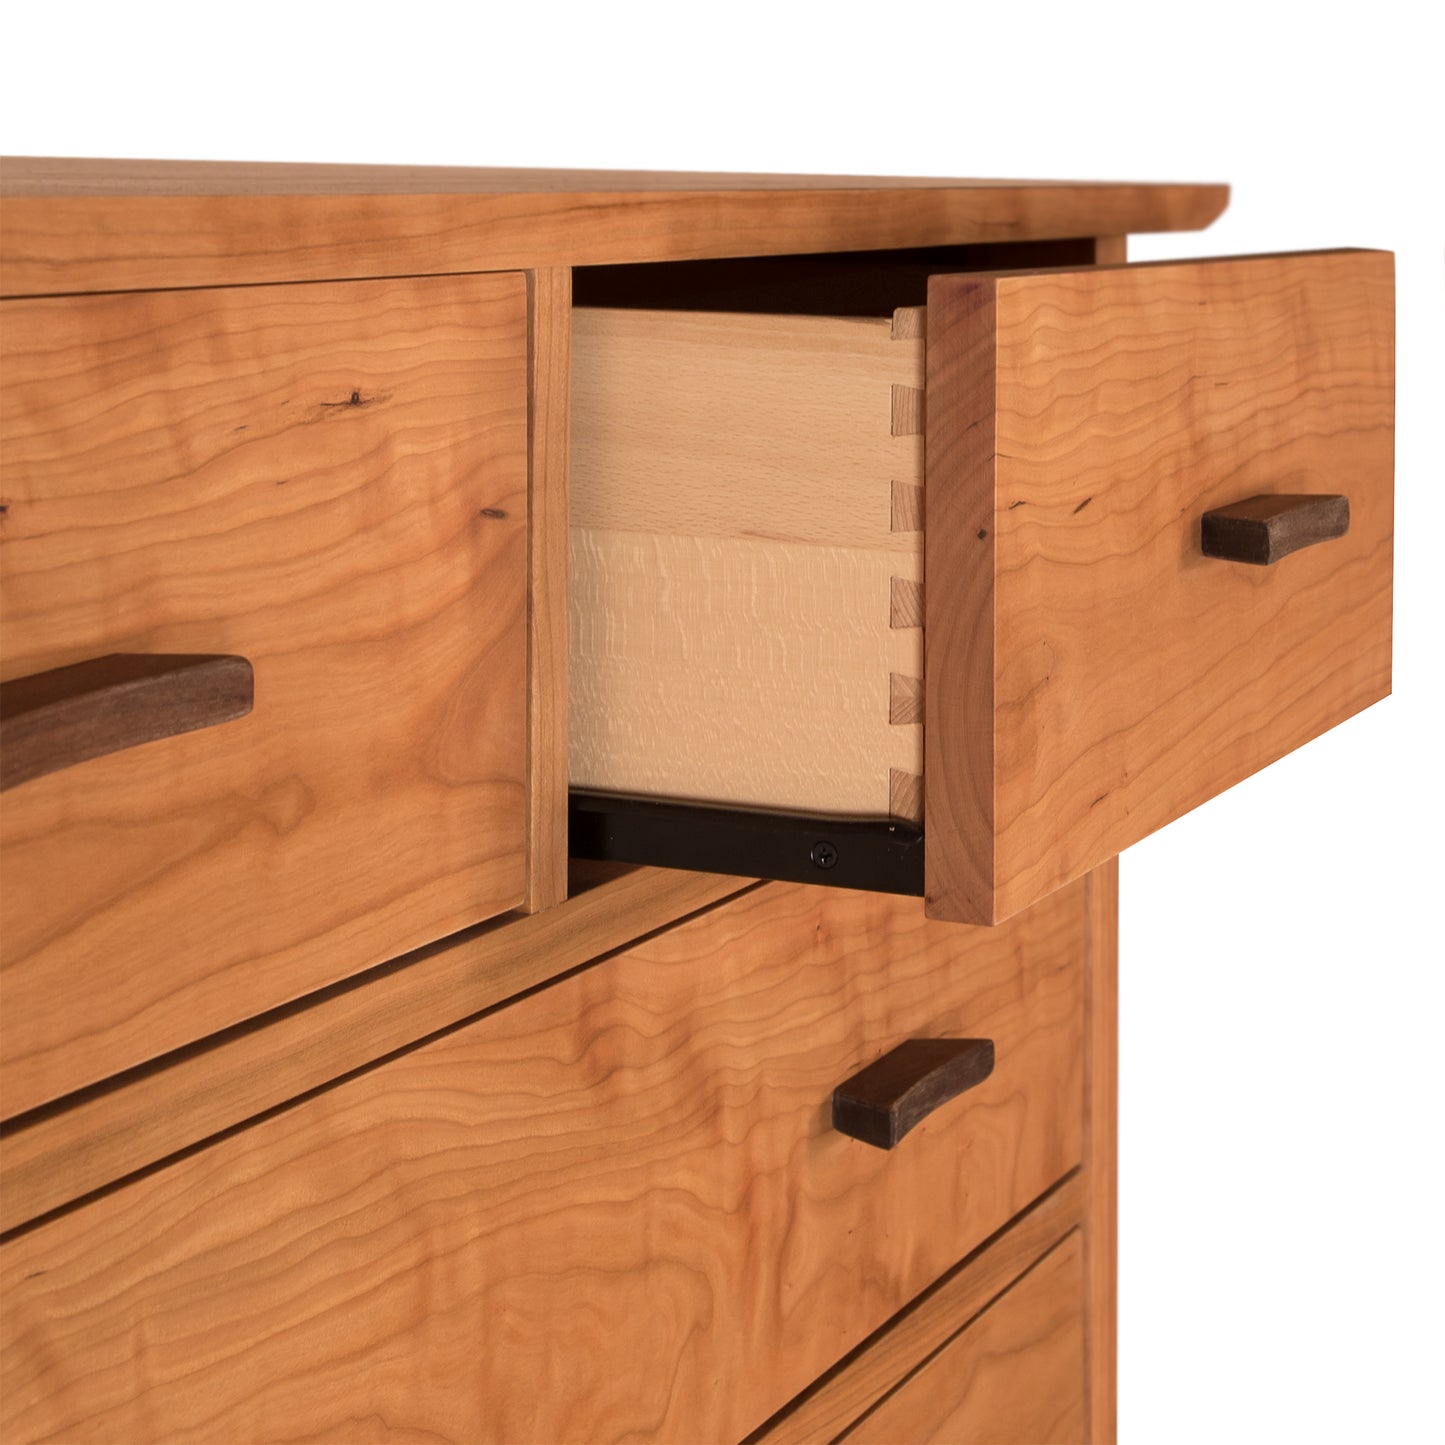 Contemporary Craftsman 7-Drawer Chest by Vermont Furniture Designs with an open drawer showcasing dovetail joinery.